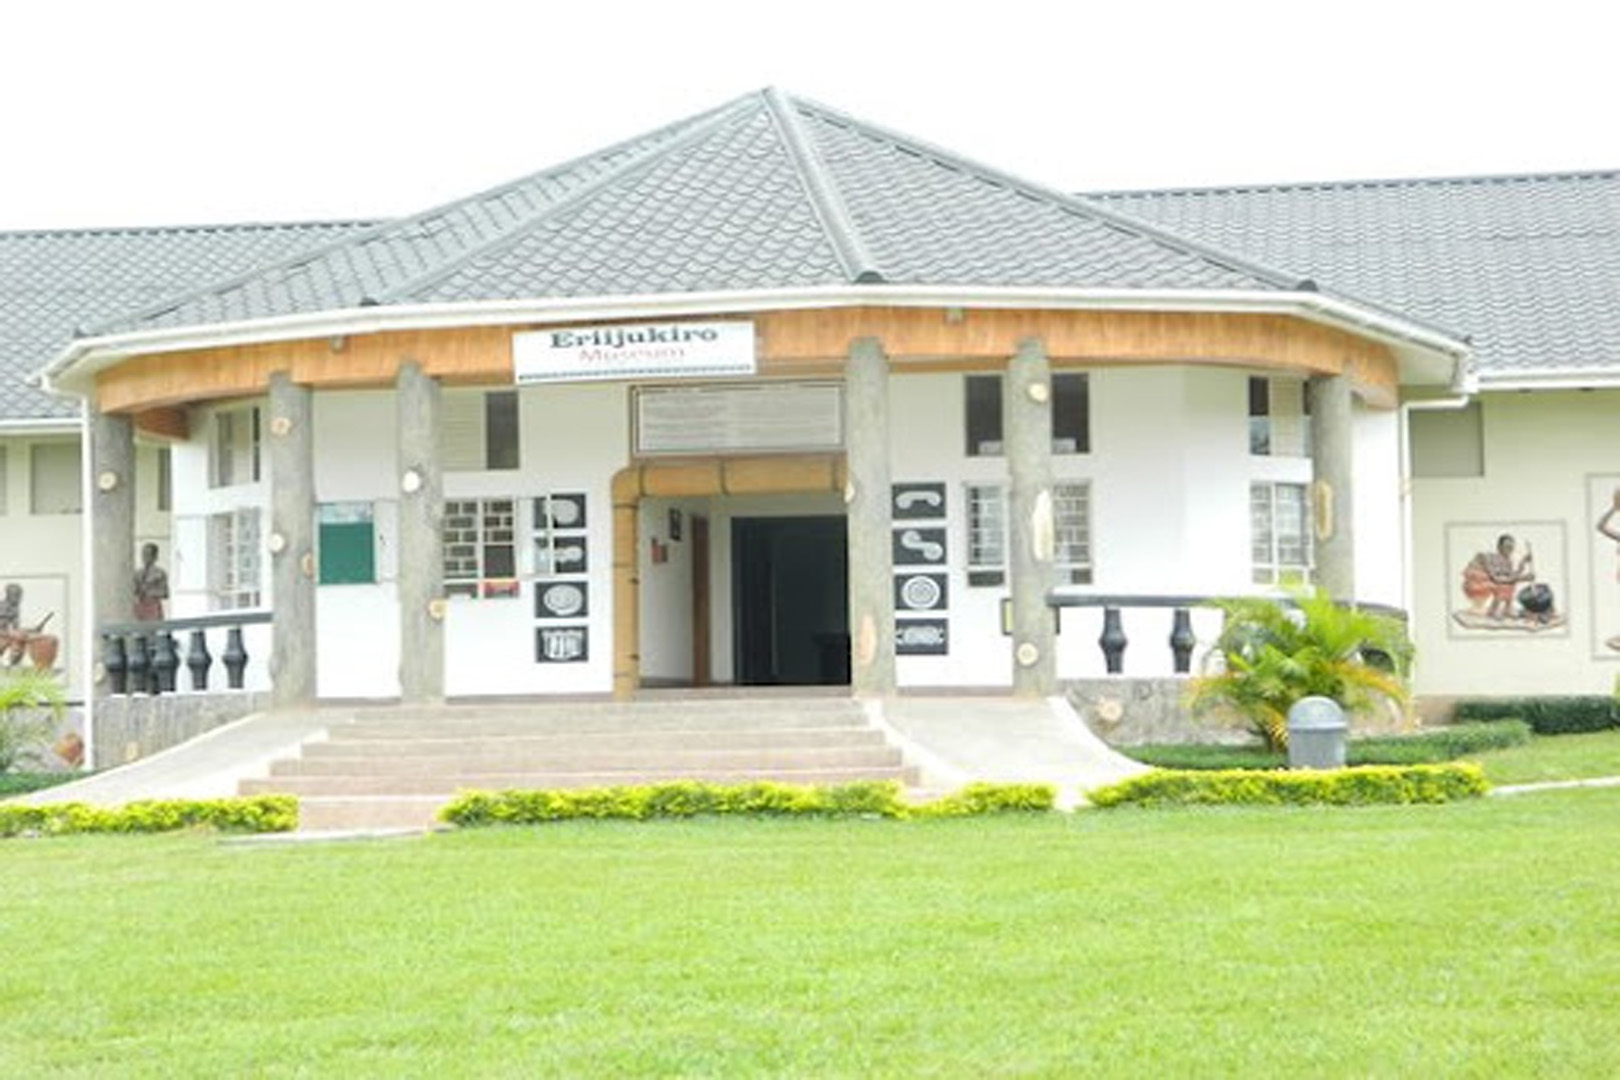 Igongo Cultural Centre, one of the attractions around Lake Mburo National Park